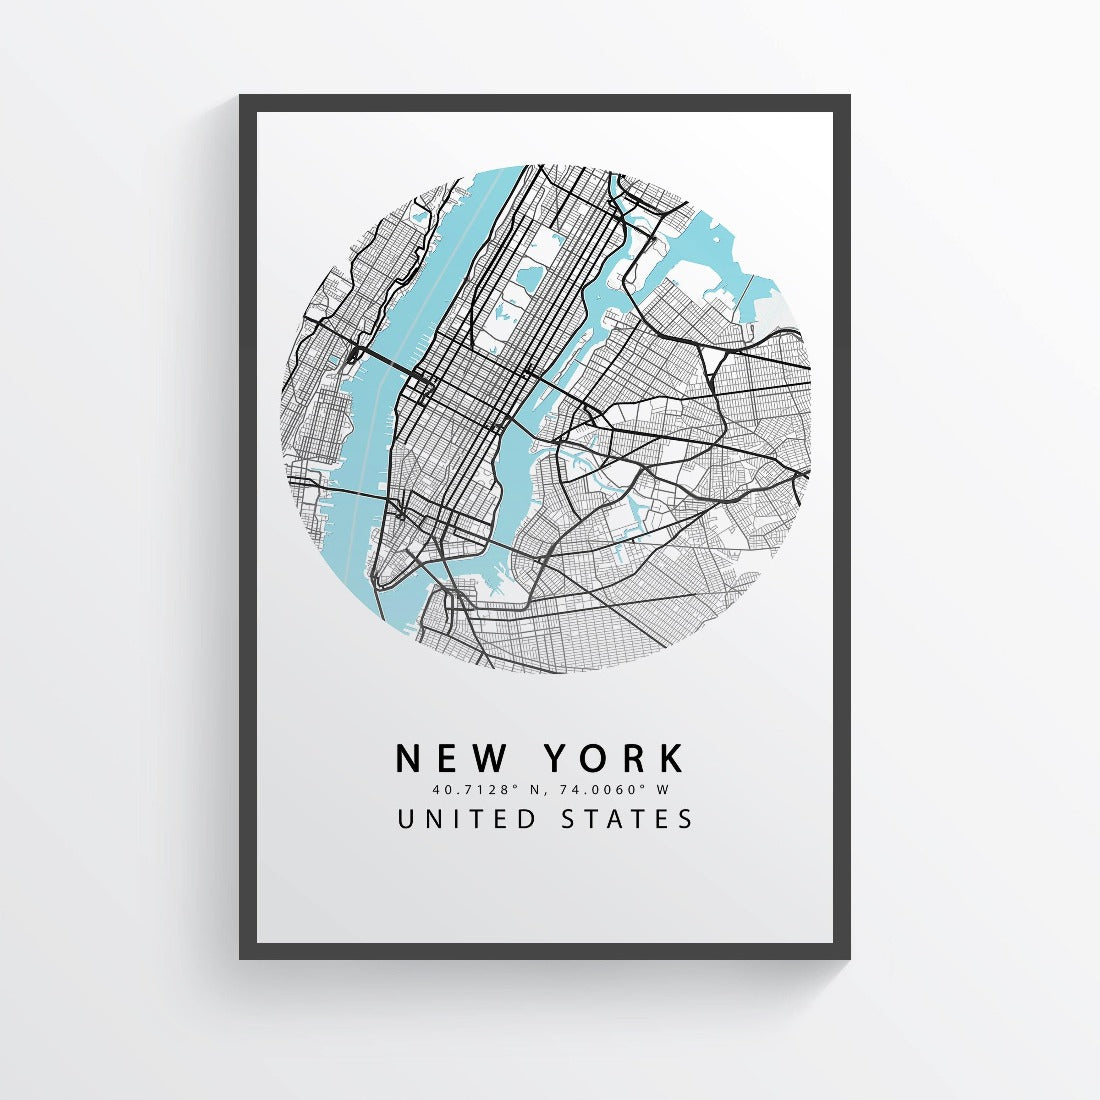 Embrace your inner wanderlust. Inspired by the concrete jungle that is New York City, this map print is the perfect way to show your love for the city that never sleeps. With a beautiful and minimalist design, it would look great in any living space. Hang it in your bedroom, living room or office and dream of adventures in the big city.